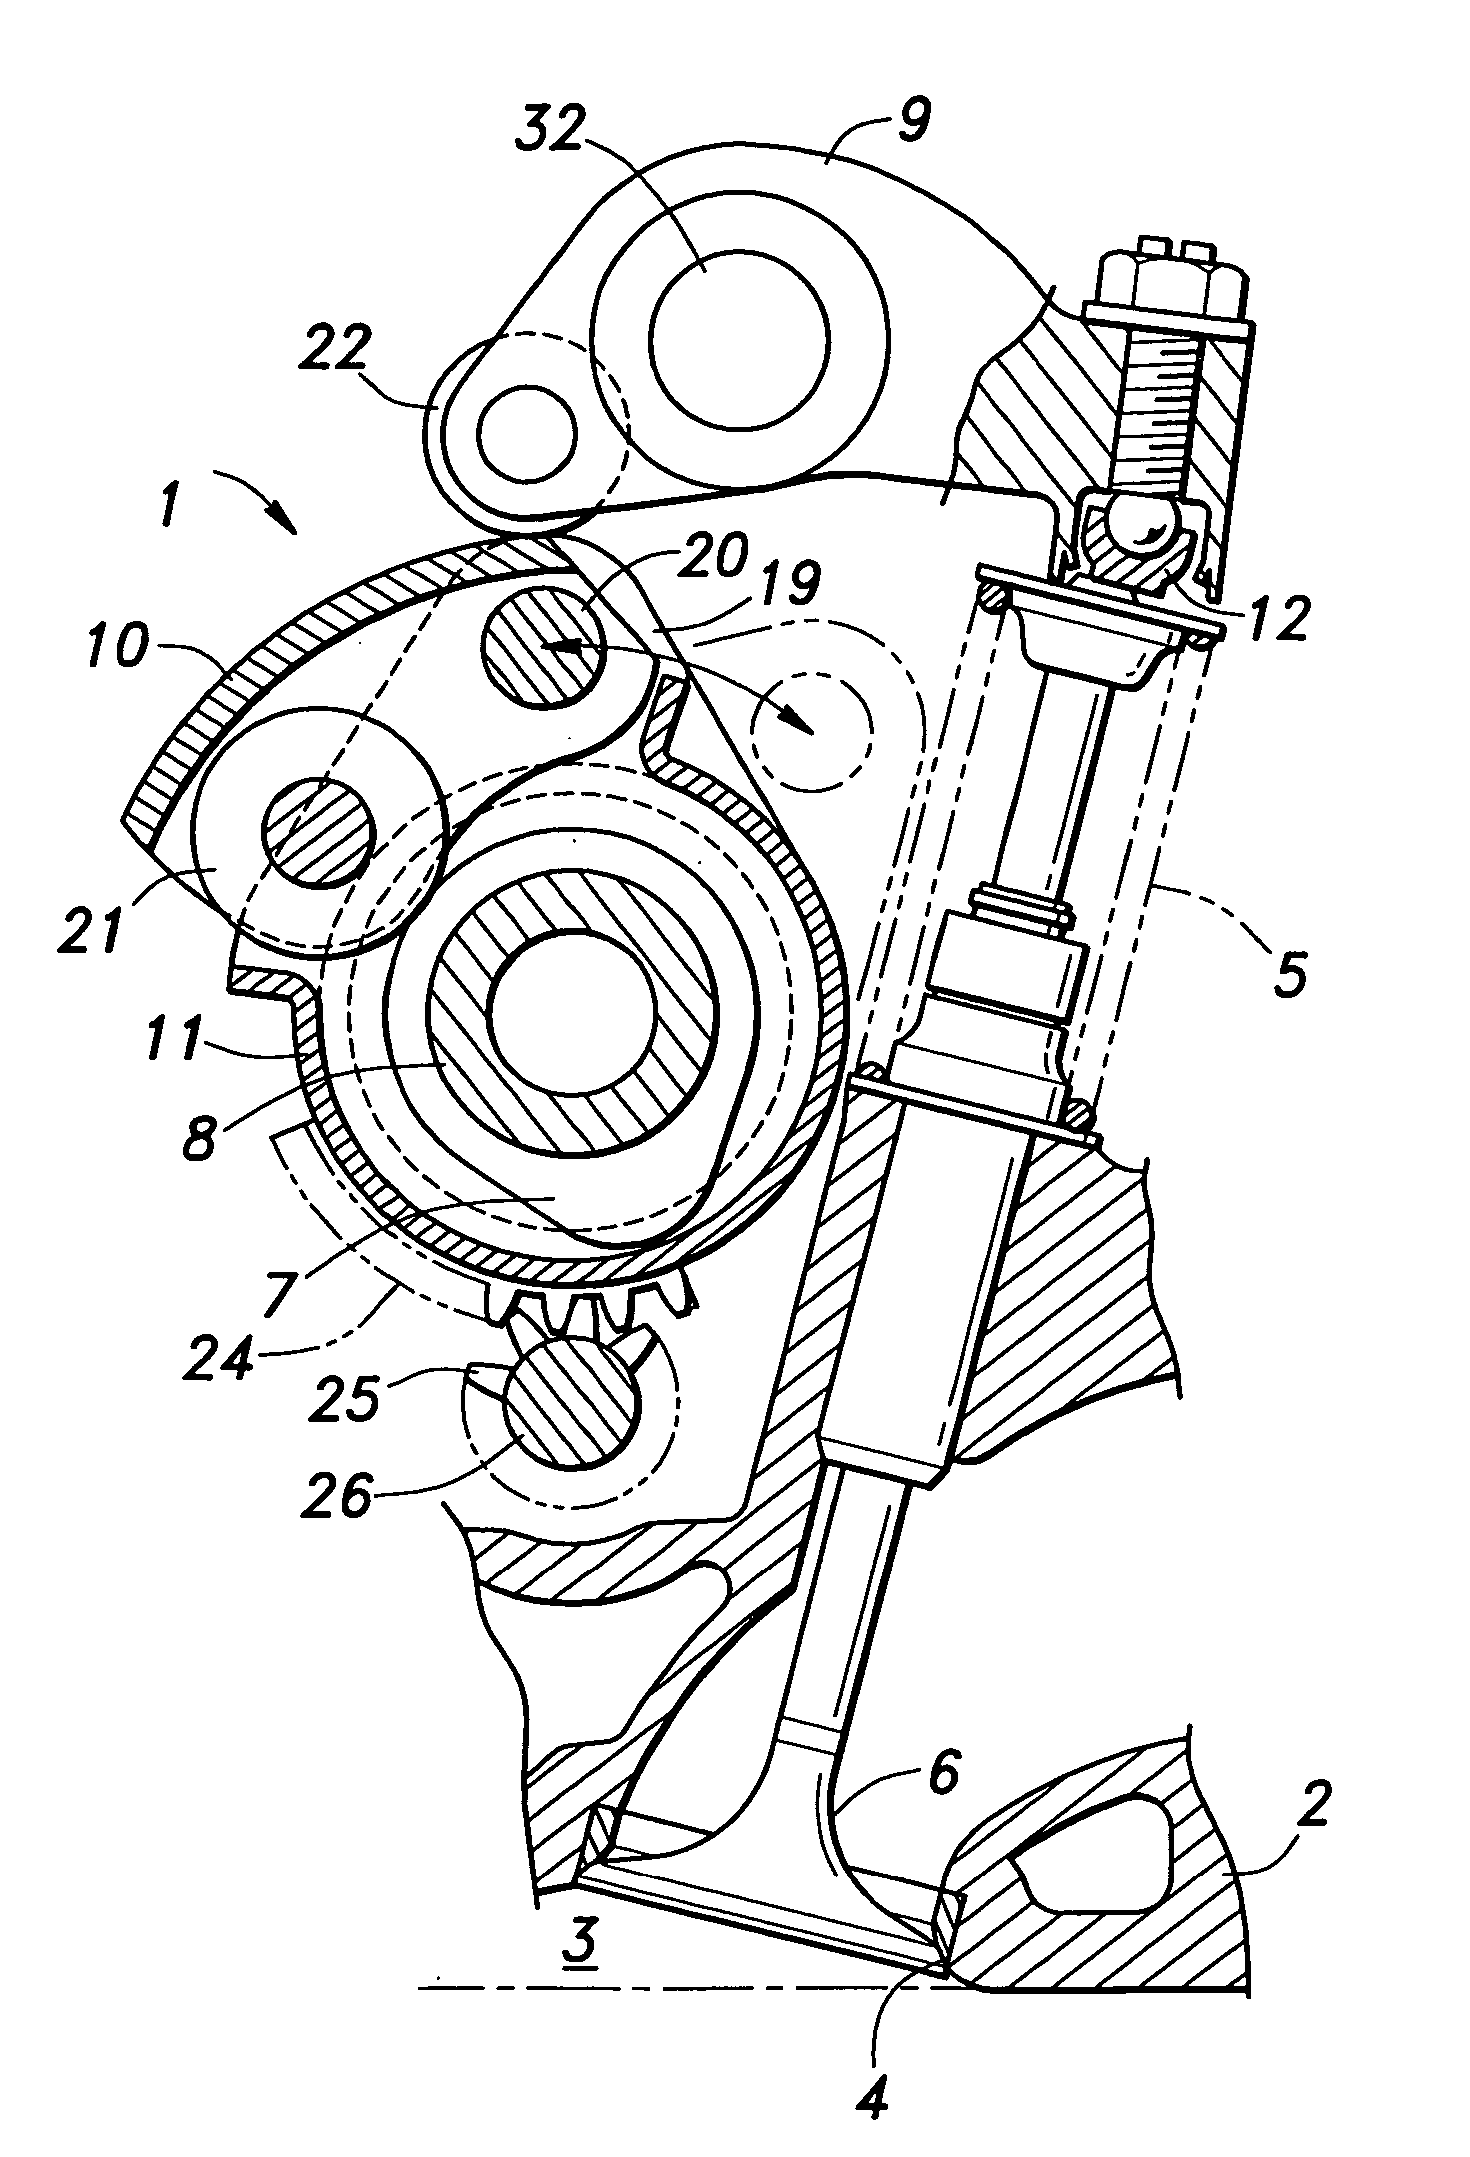 Variable valve actuating device